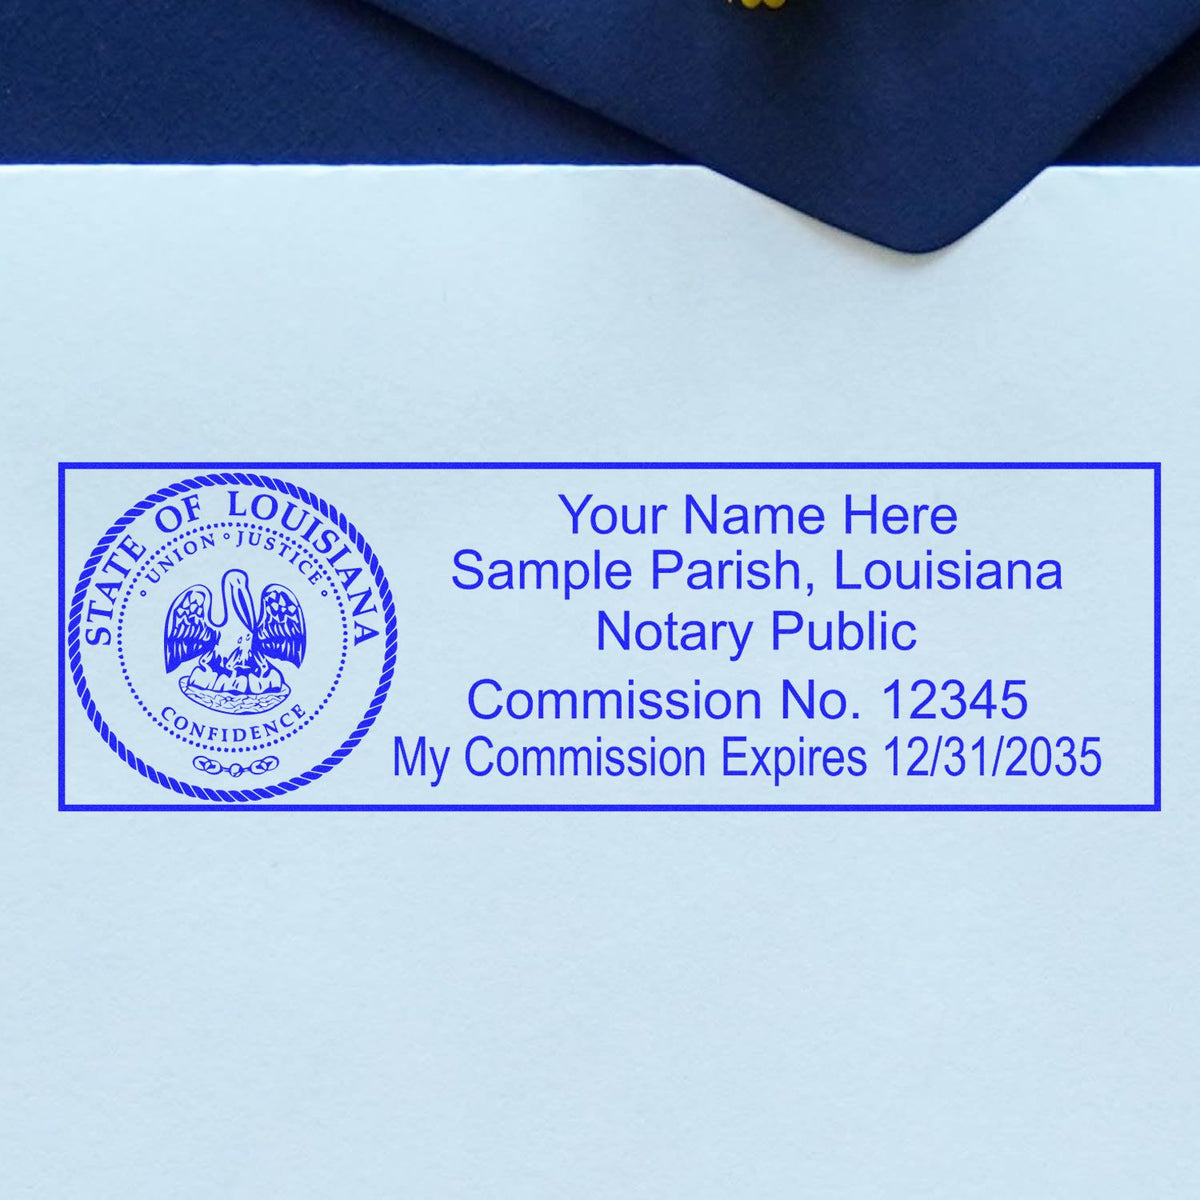 This paper is stamped with a sample imprint of the Slim Pre-Inked State Seal Notary Stamp for Louisiana, signifying its quality and reliability.